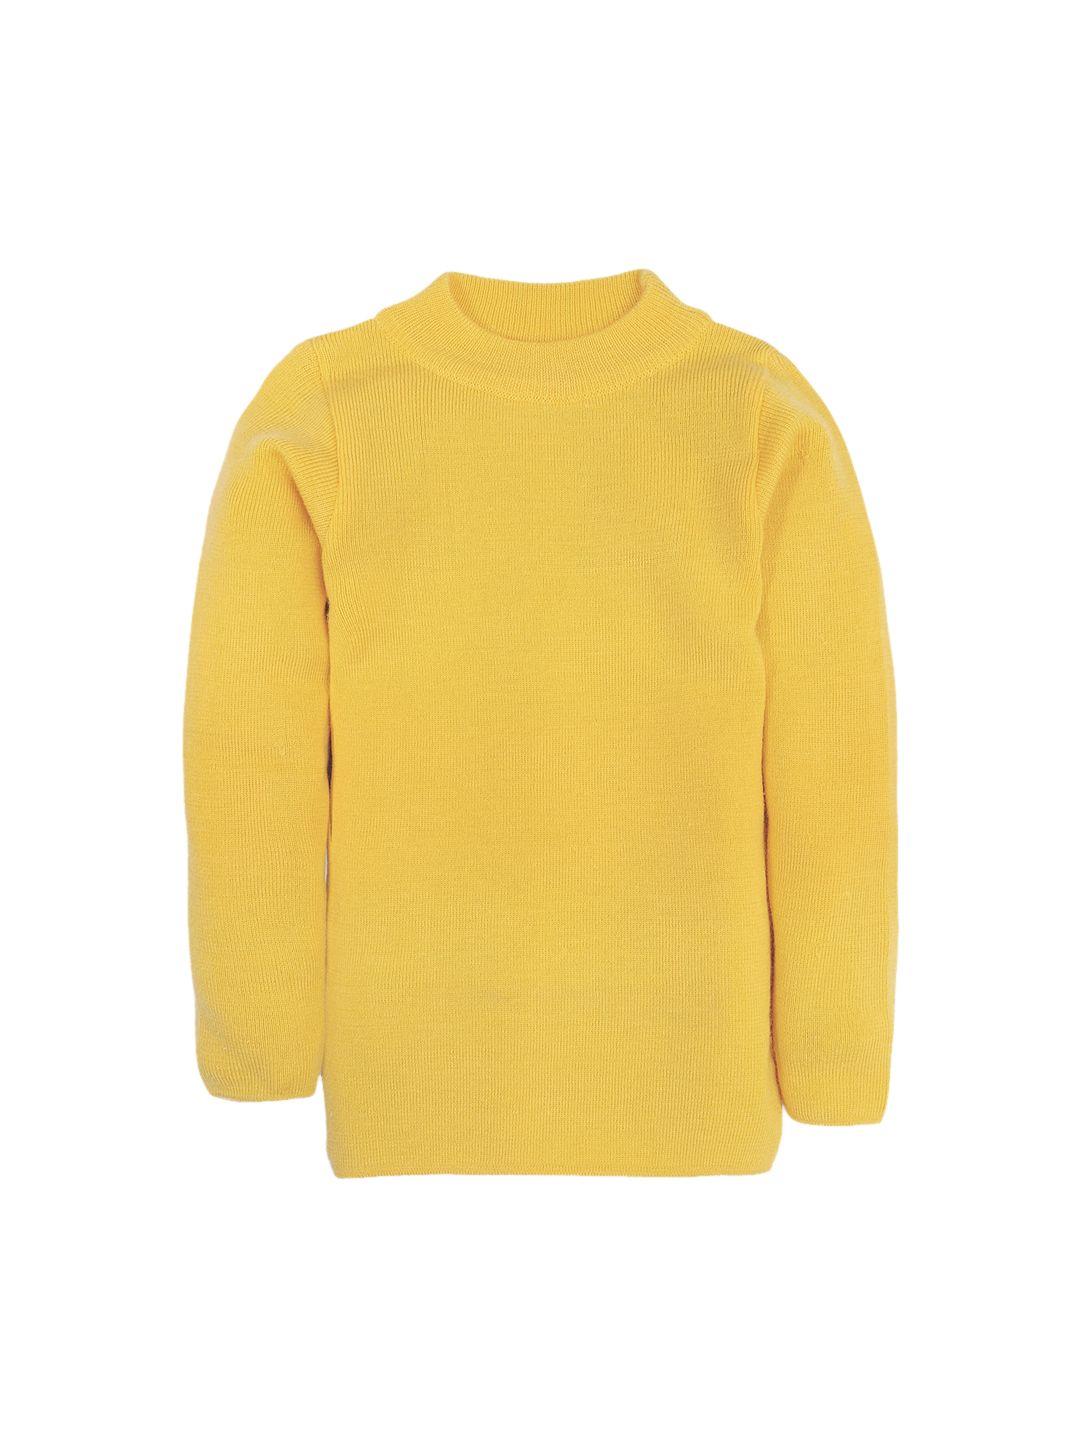 rvk unisex yellow solid pullover sweater